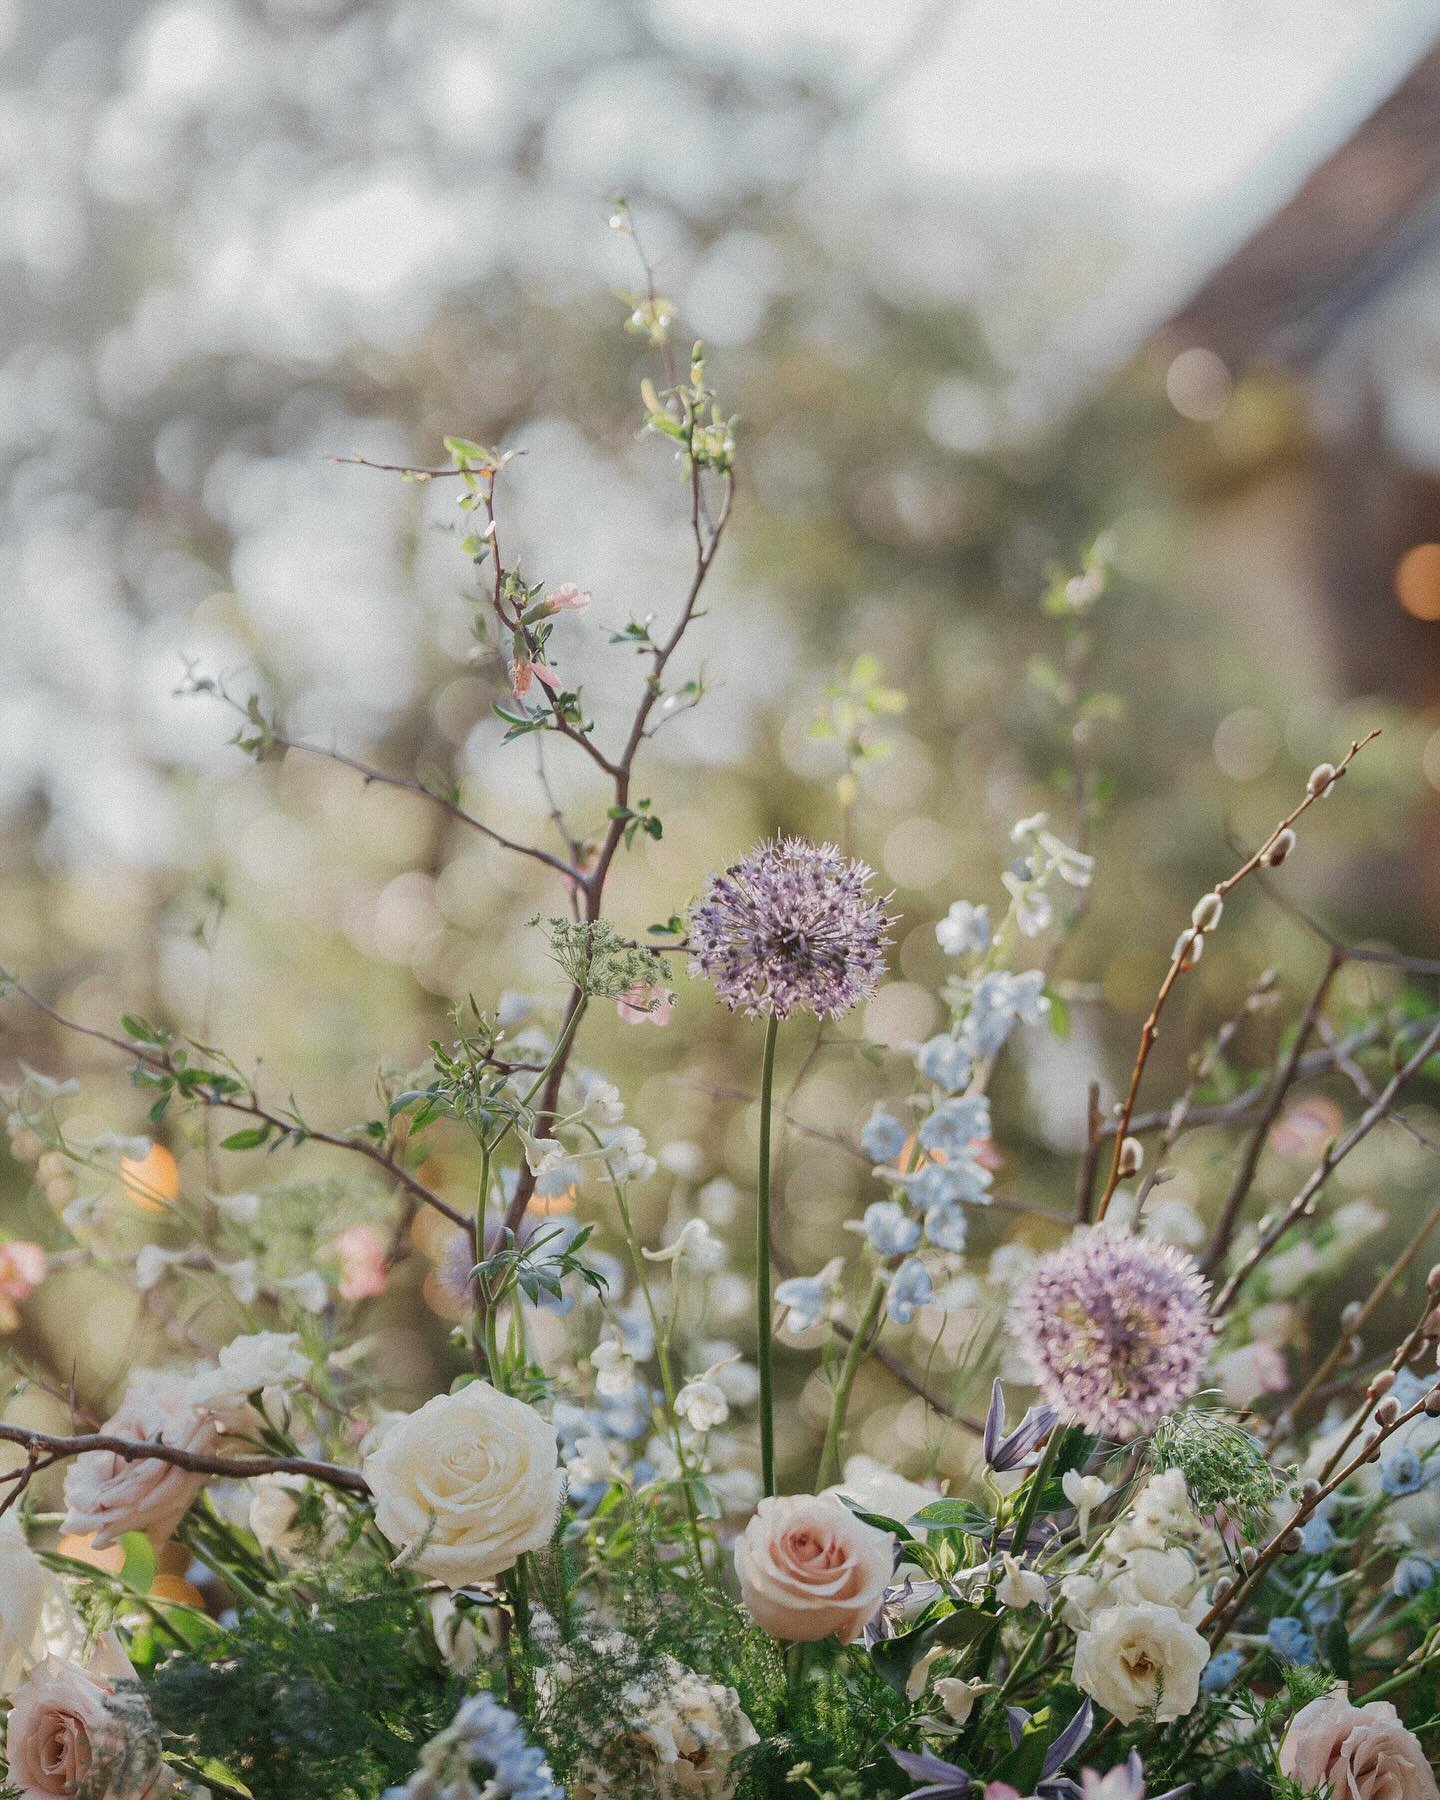 A dreamy spring wedding for Madison and James. 🌸🌷

Venue: @hollyhedgeestate 
Florals: @thestemsend 
DJ: @eastcoast.eventgroup 
Hair: @bewitchedbridal 
MUA: @dariansaesthetic